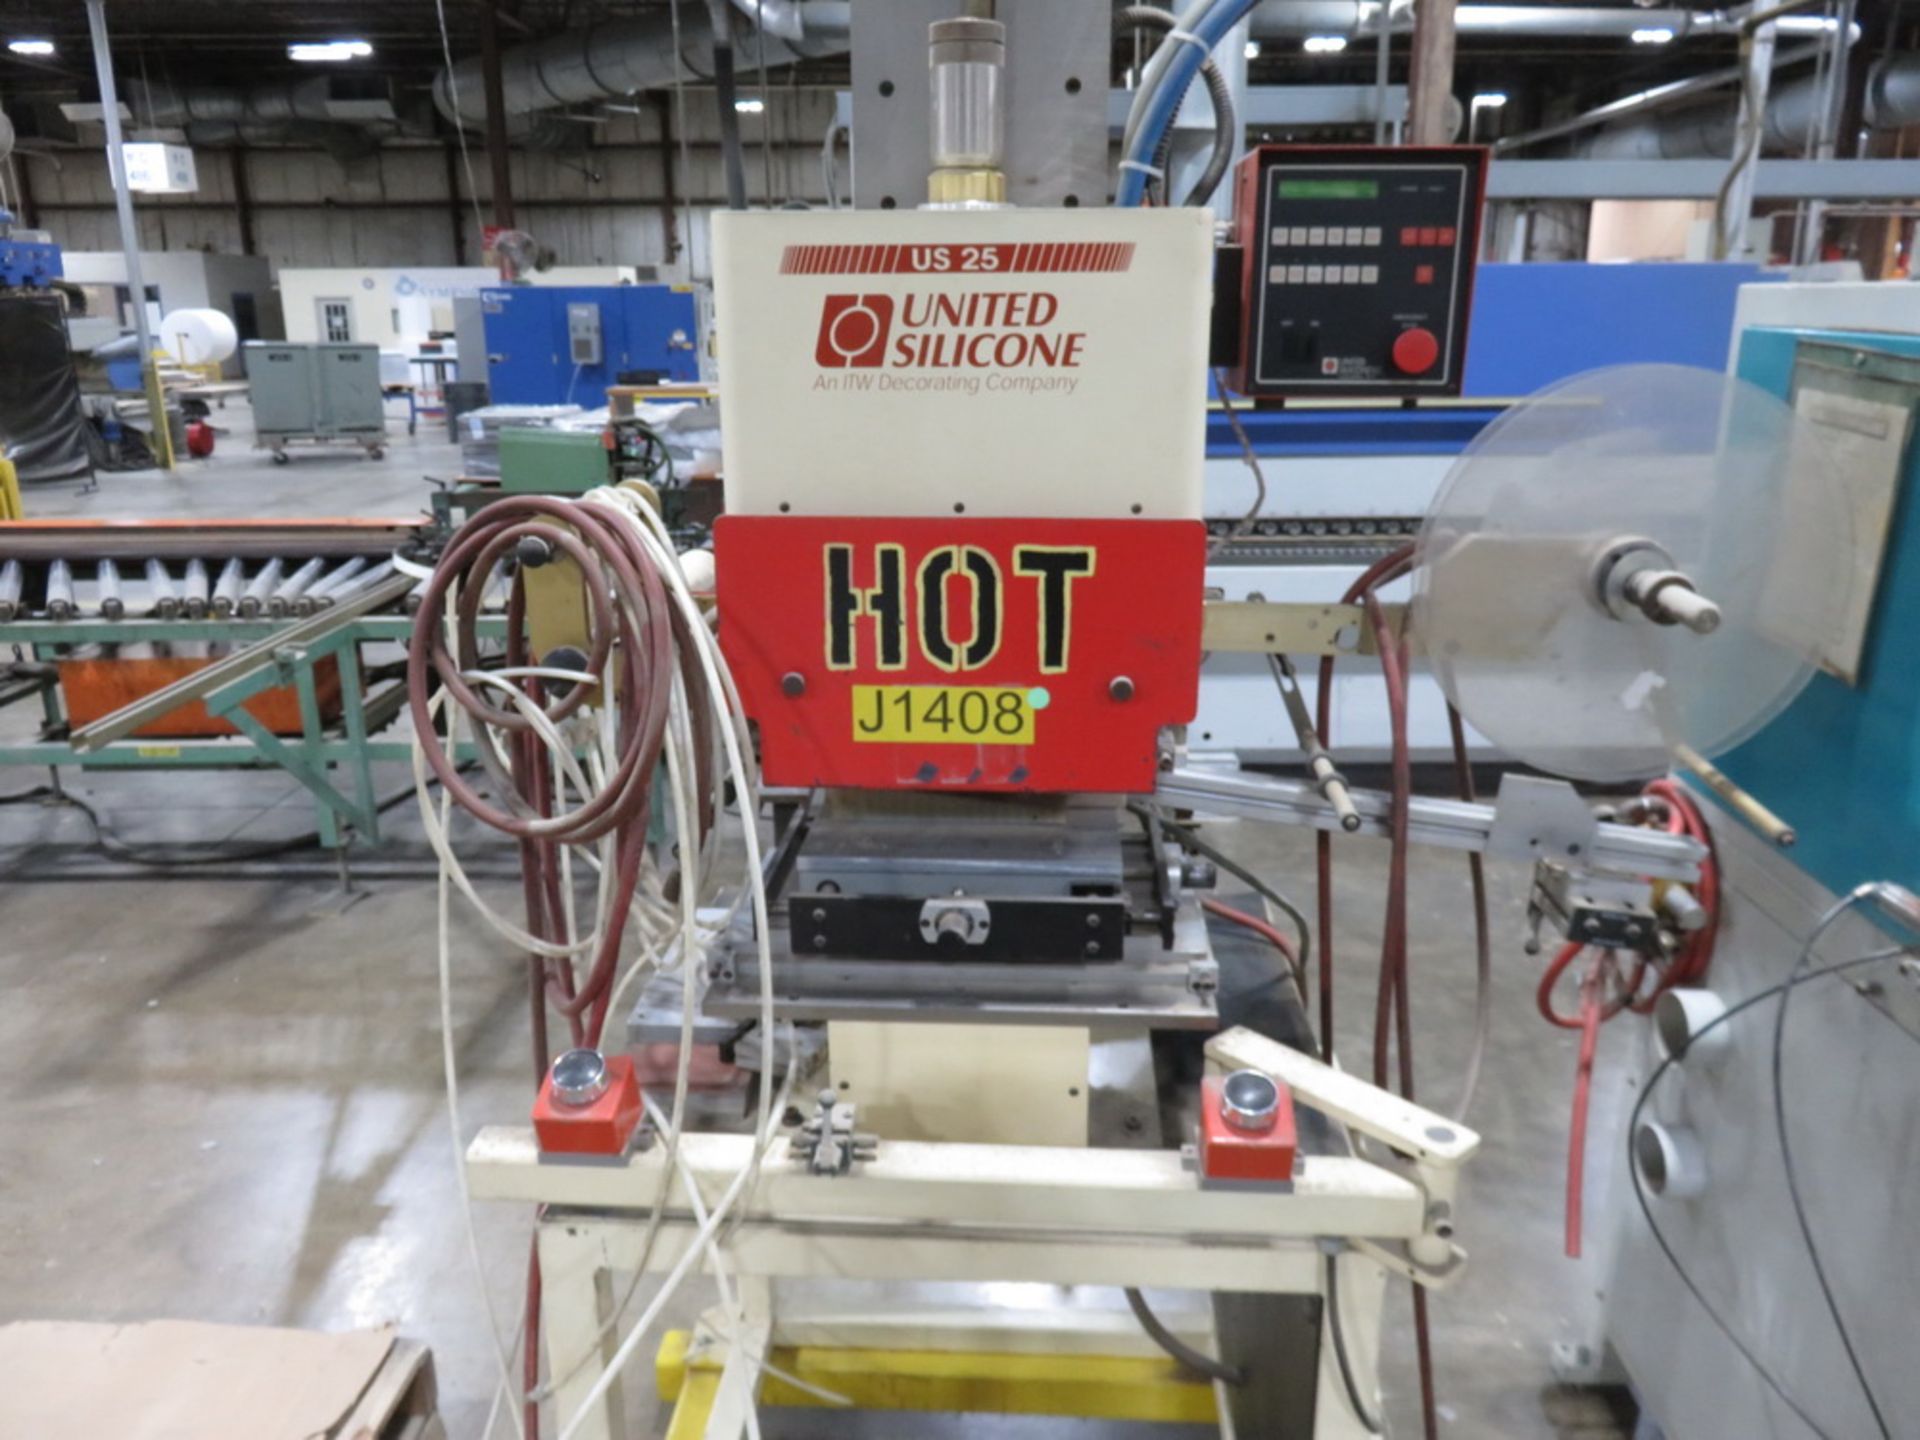 United Silicone US-25 Hot Stamping Machine - Image 2 of 4